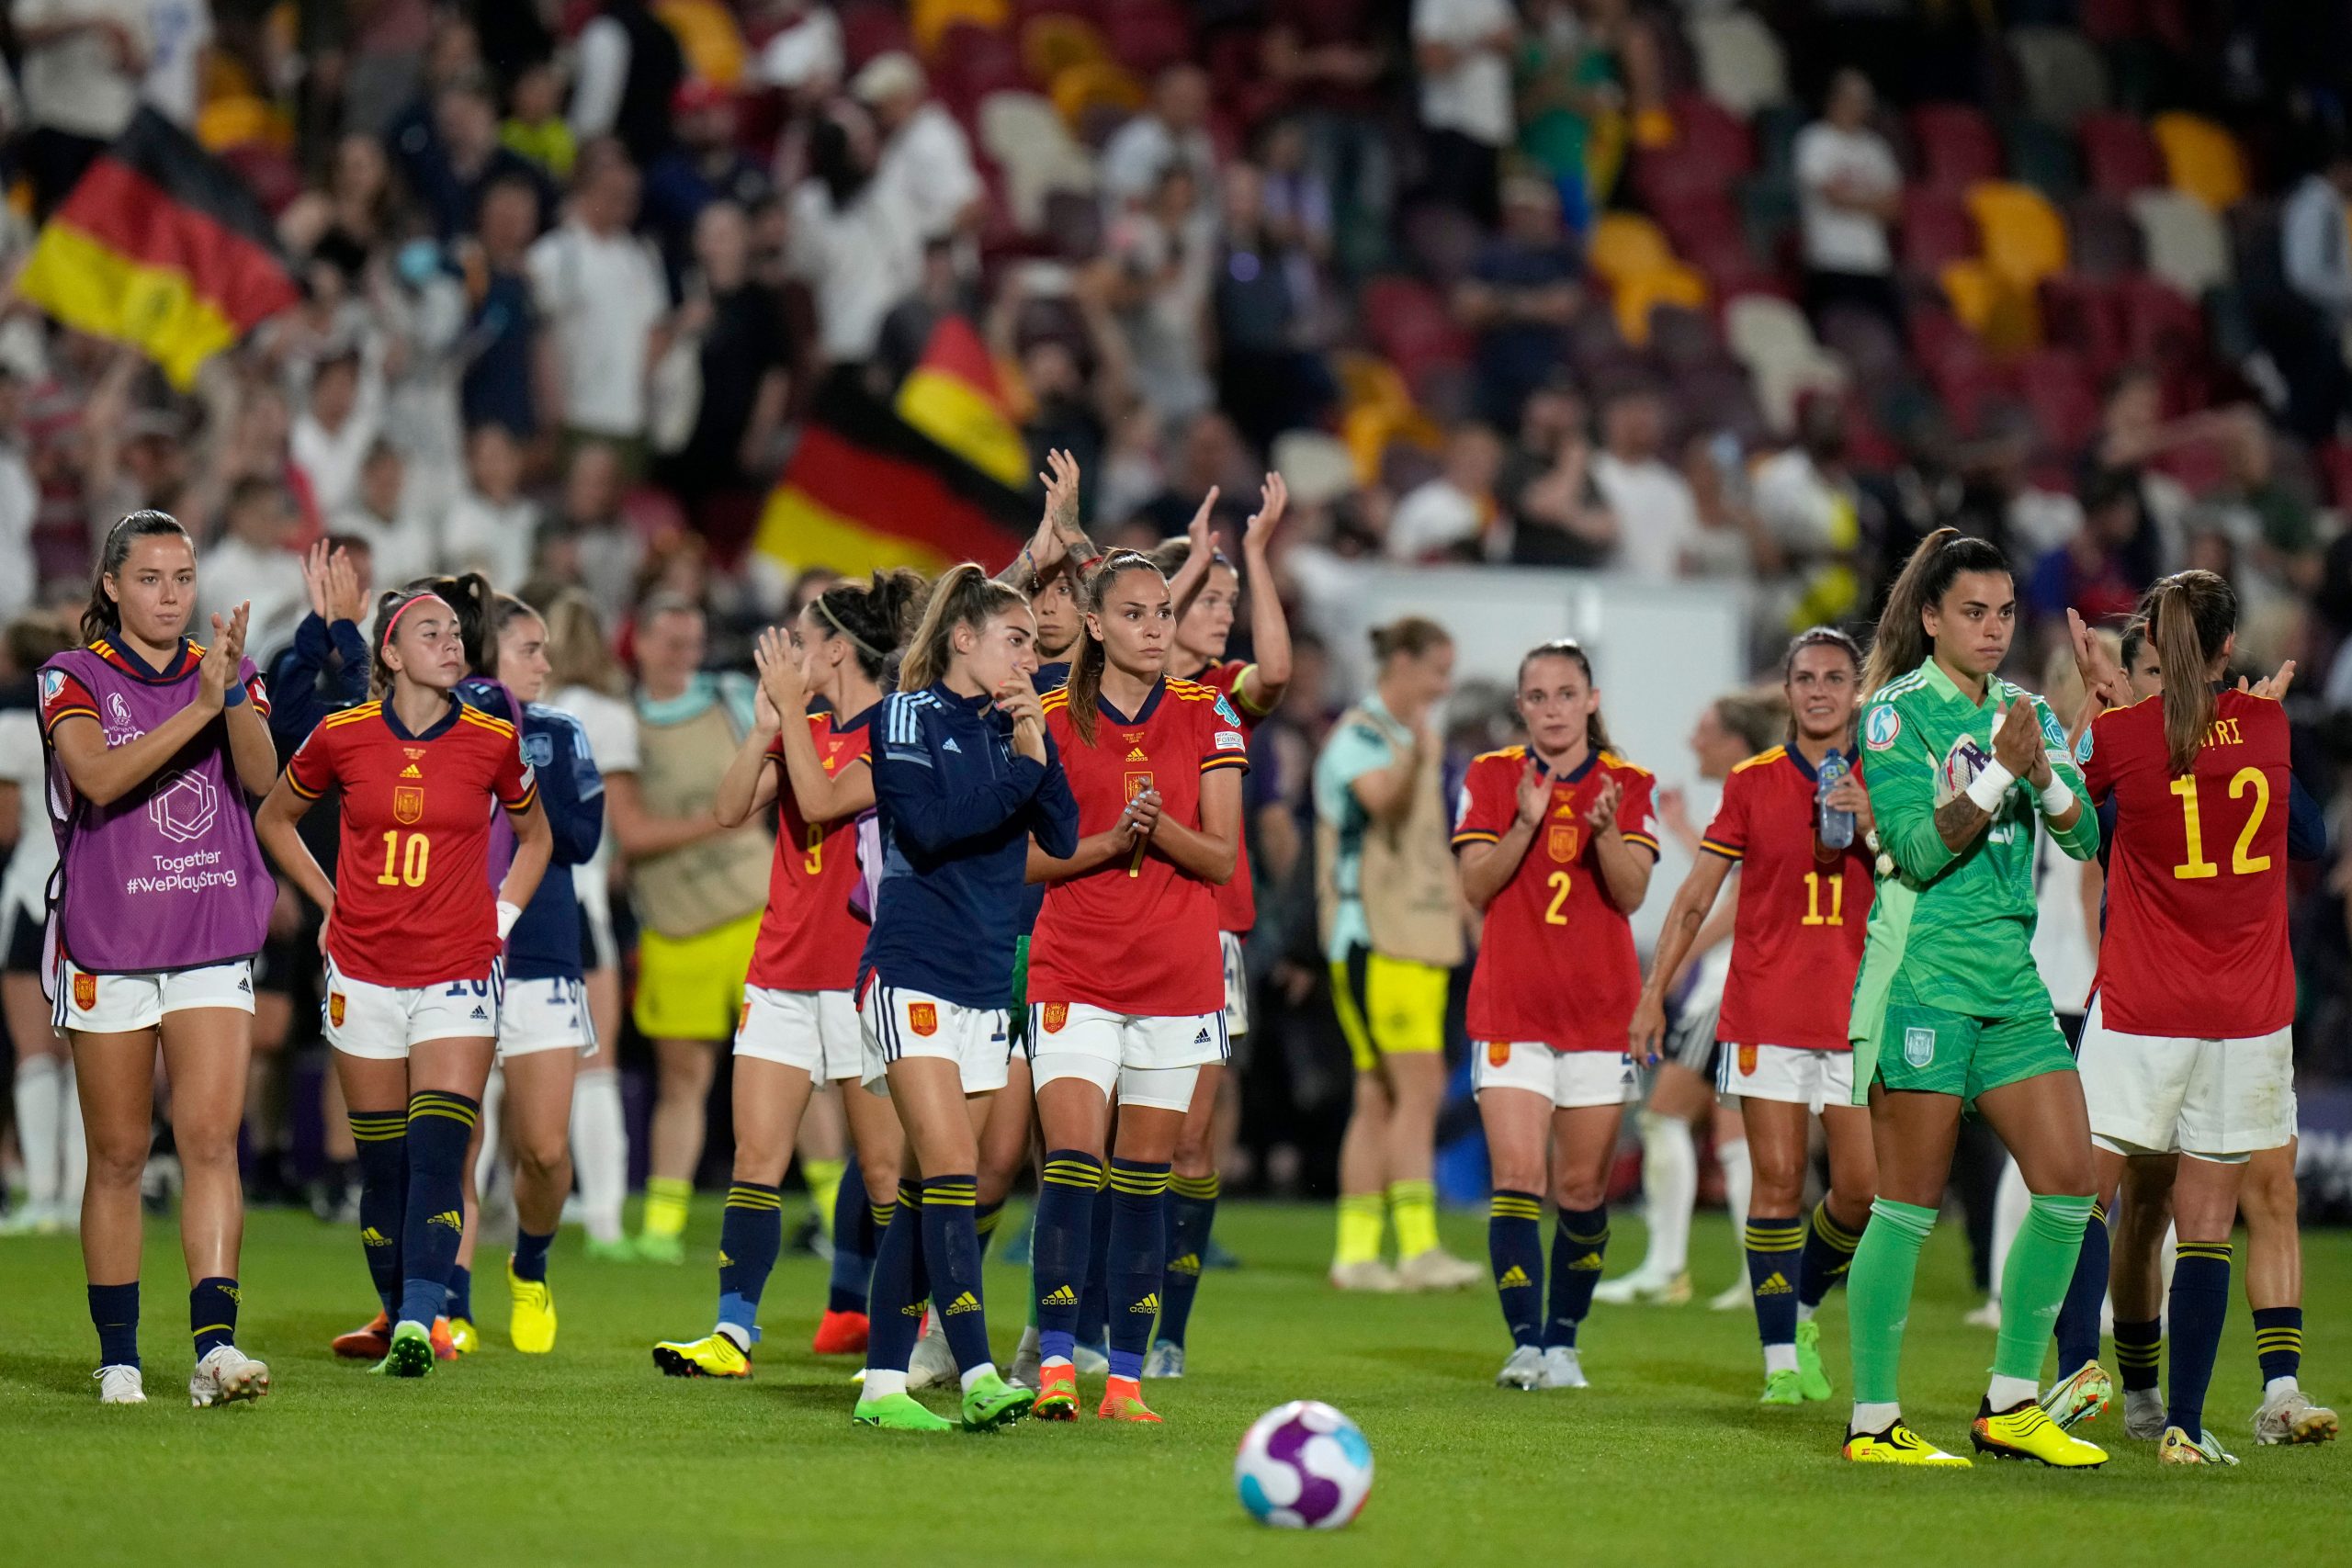 Spain womens football team: 15 players resign over differences with coach Jorge Vilda